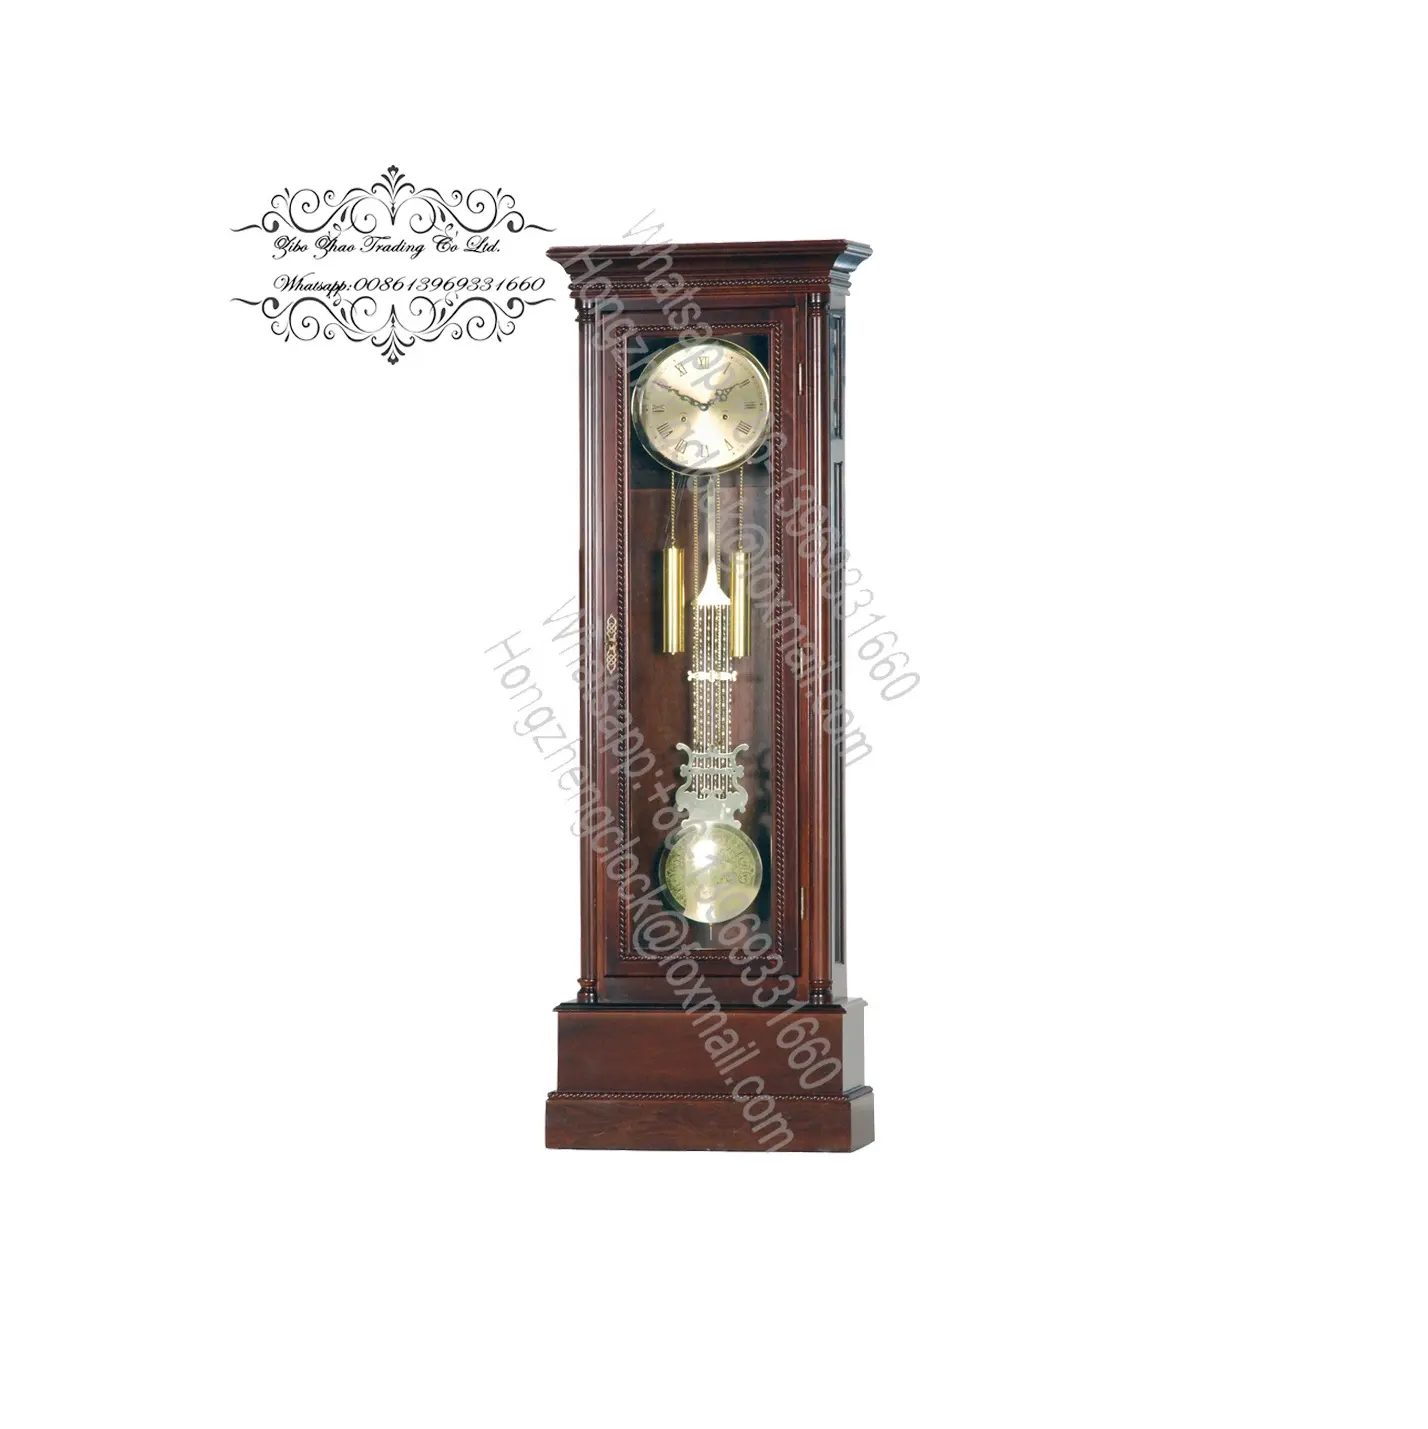 Solid Wood Grandfather Clock Polished brass-finished pendulum and decorative weights are visible behind full-length glass panels